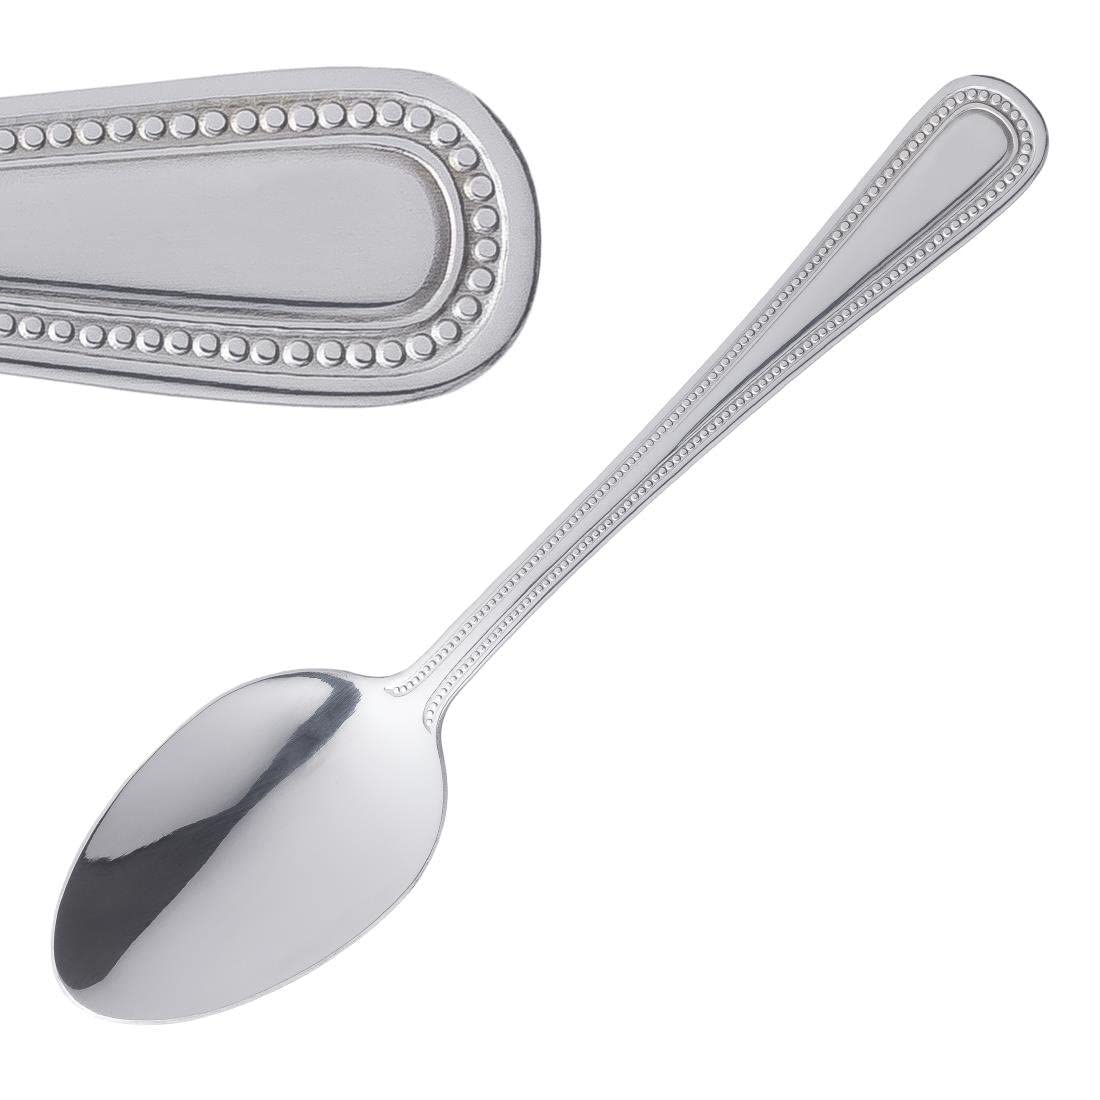 Olympia Bead Dessert Spoon Stainless Steel 185mm C129 Pack Quantity 12 RRP 12.68 CLEARANCE XL 9.99